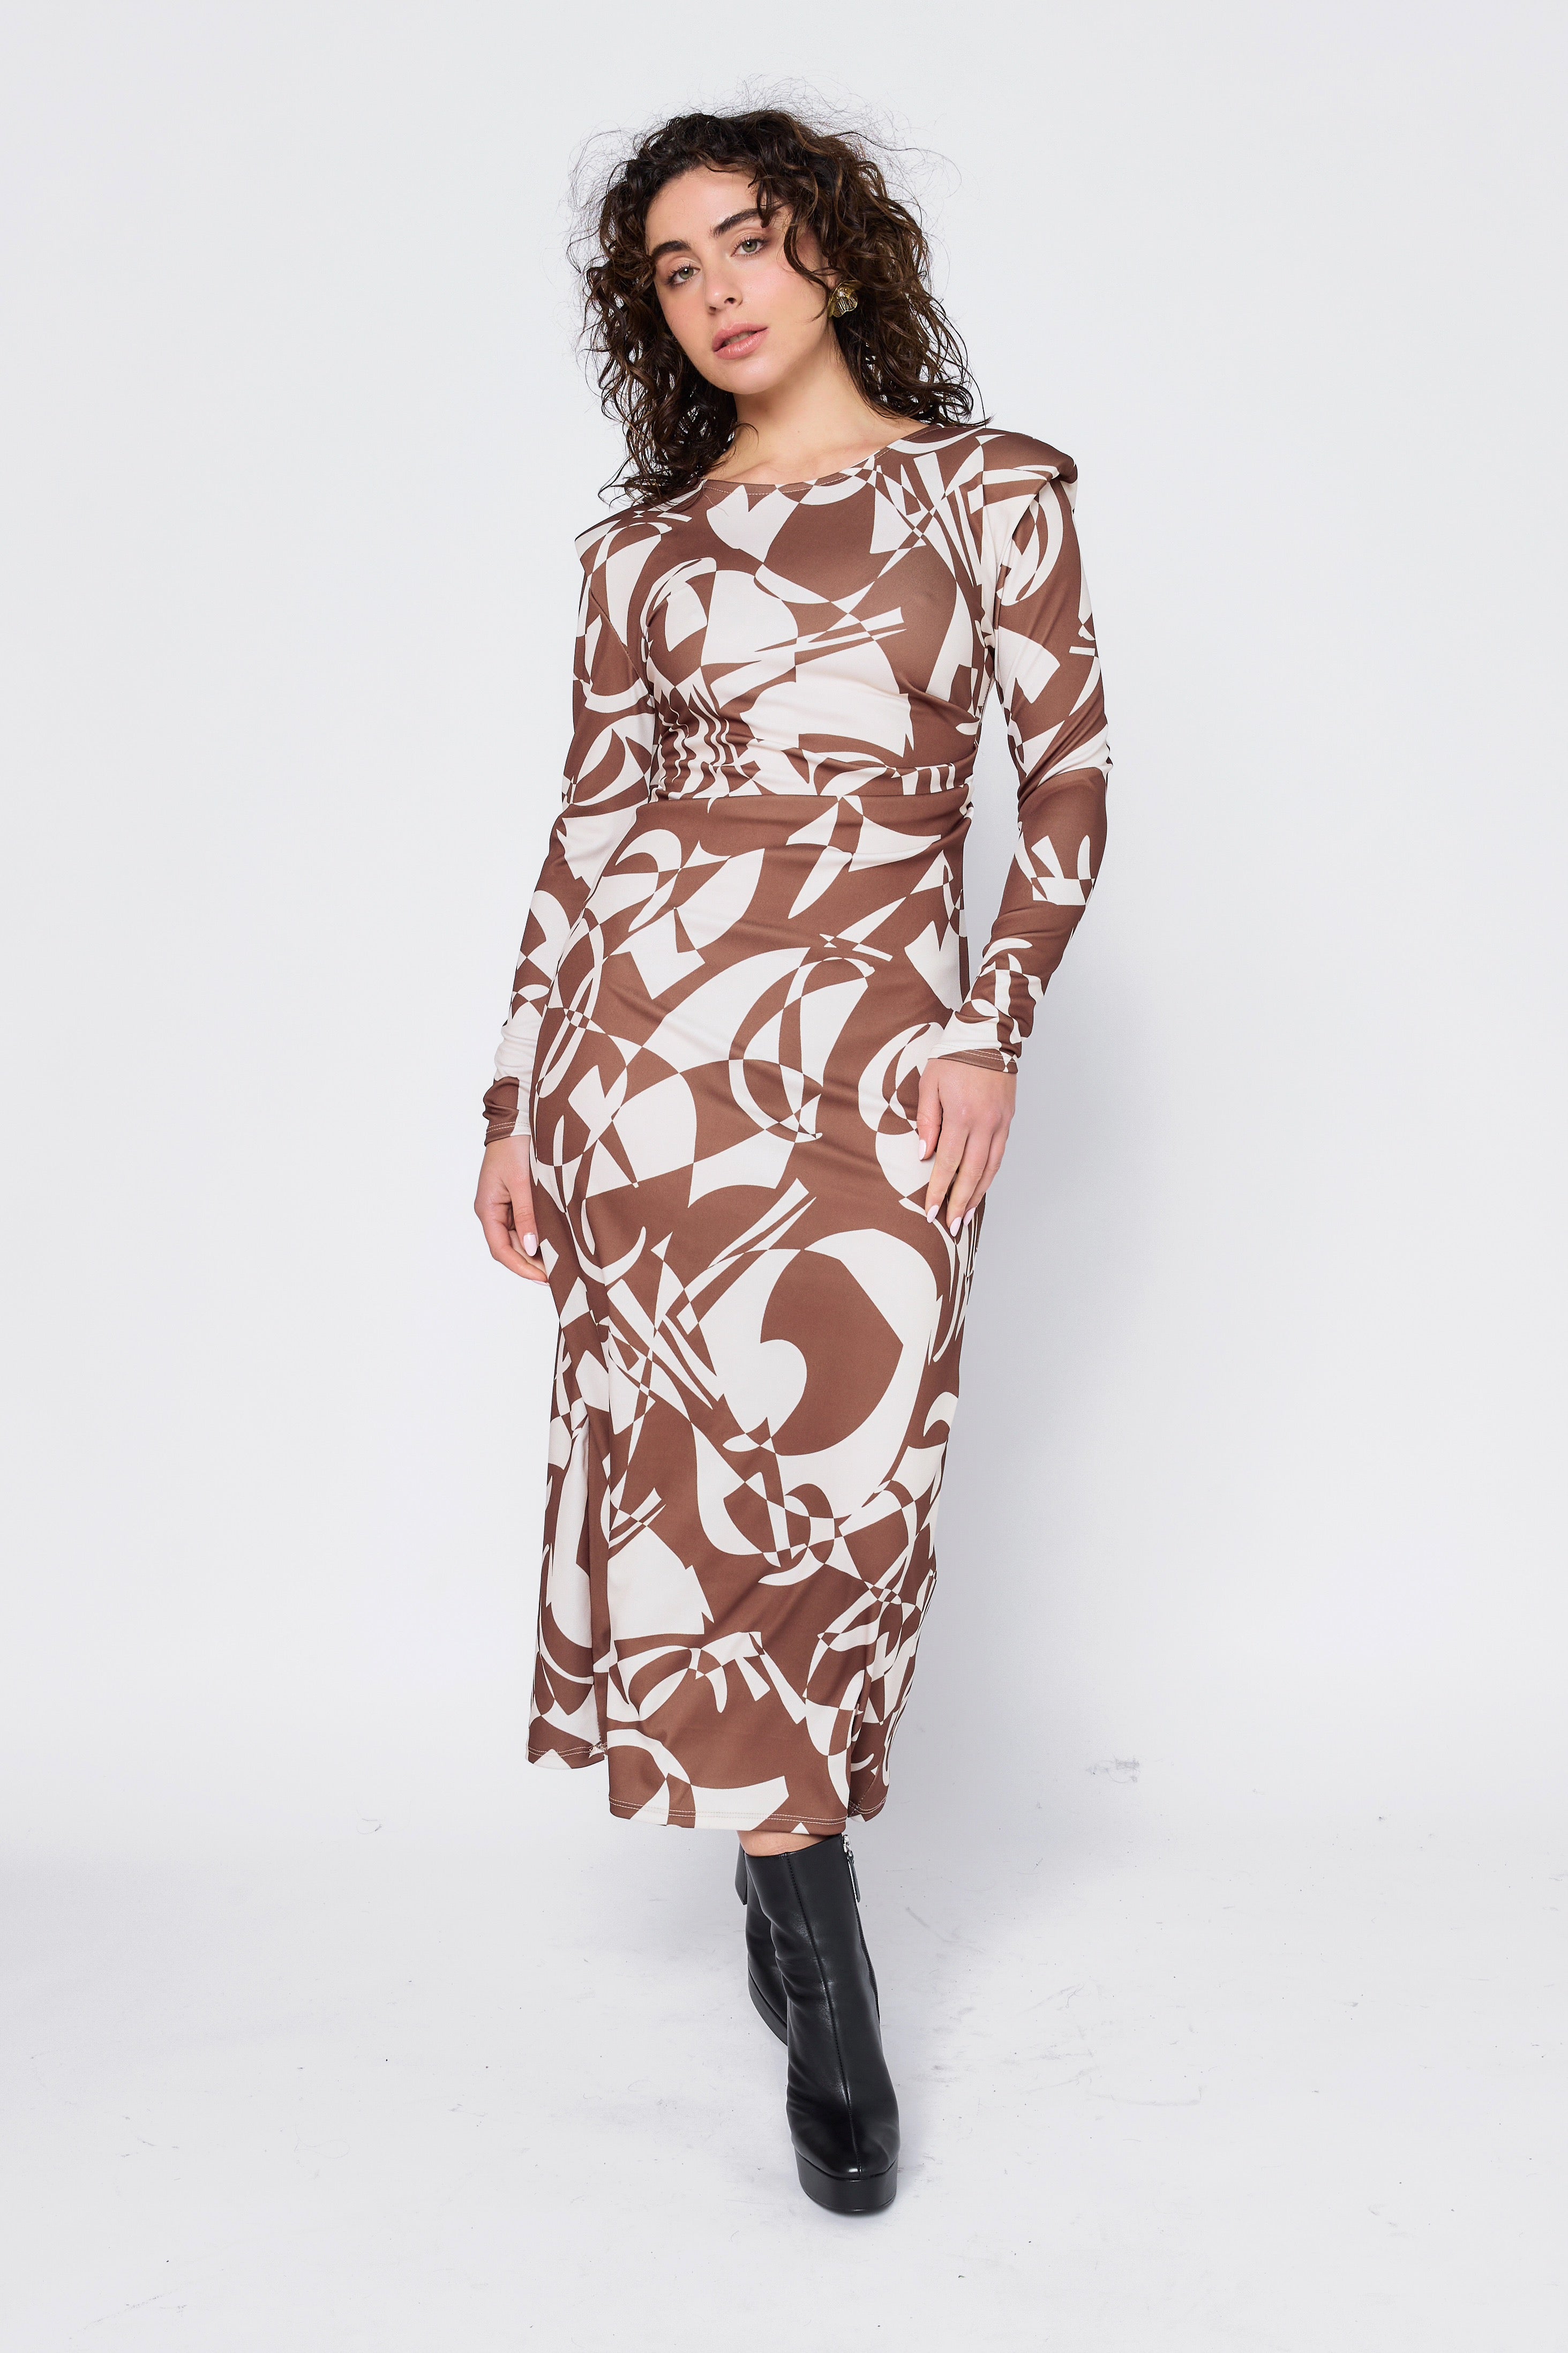 Long flowing printed dress with shoulder pads